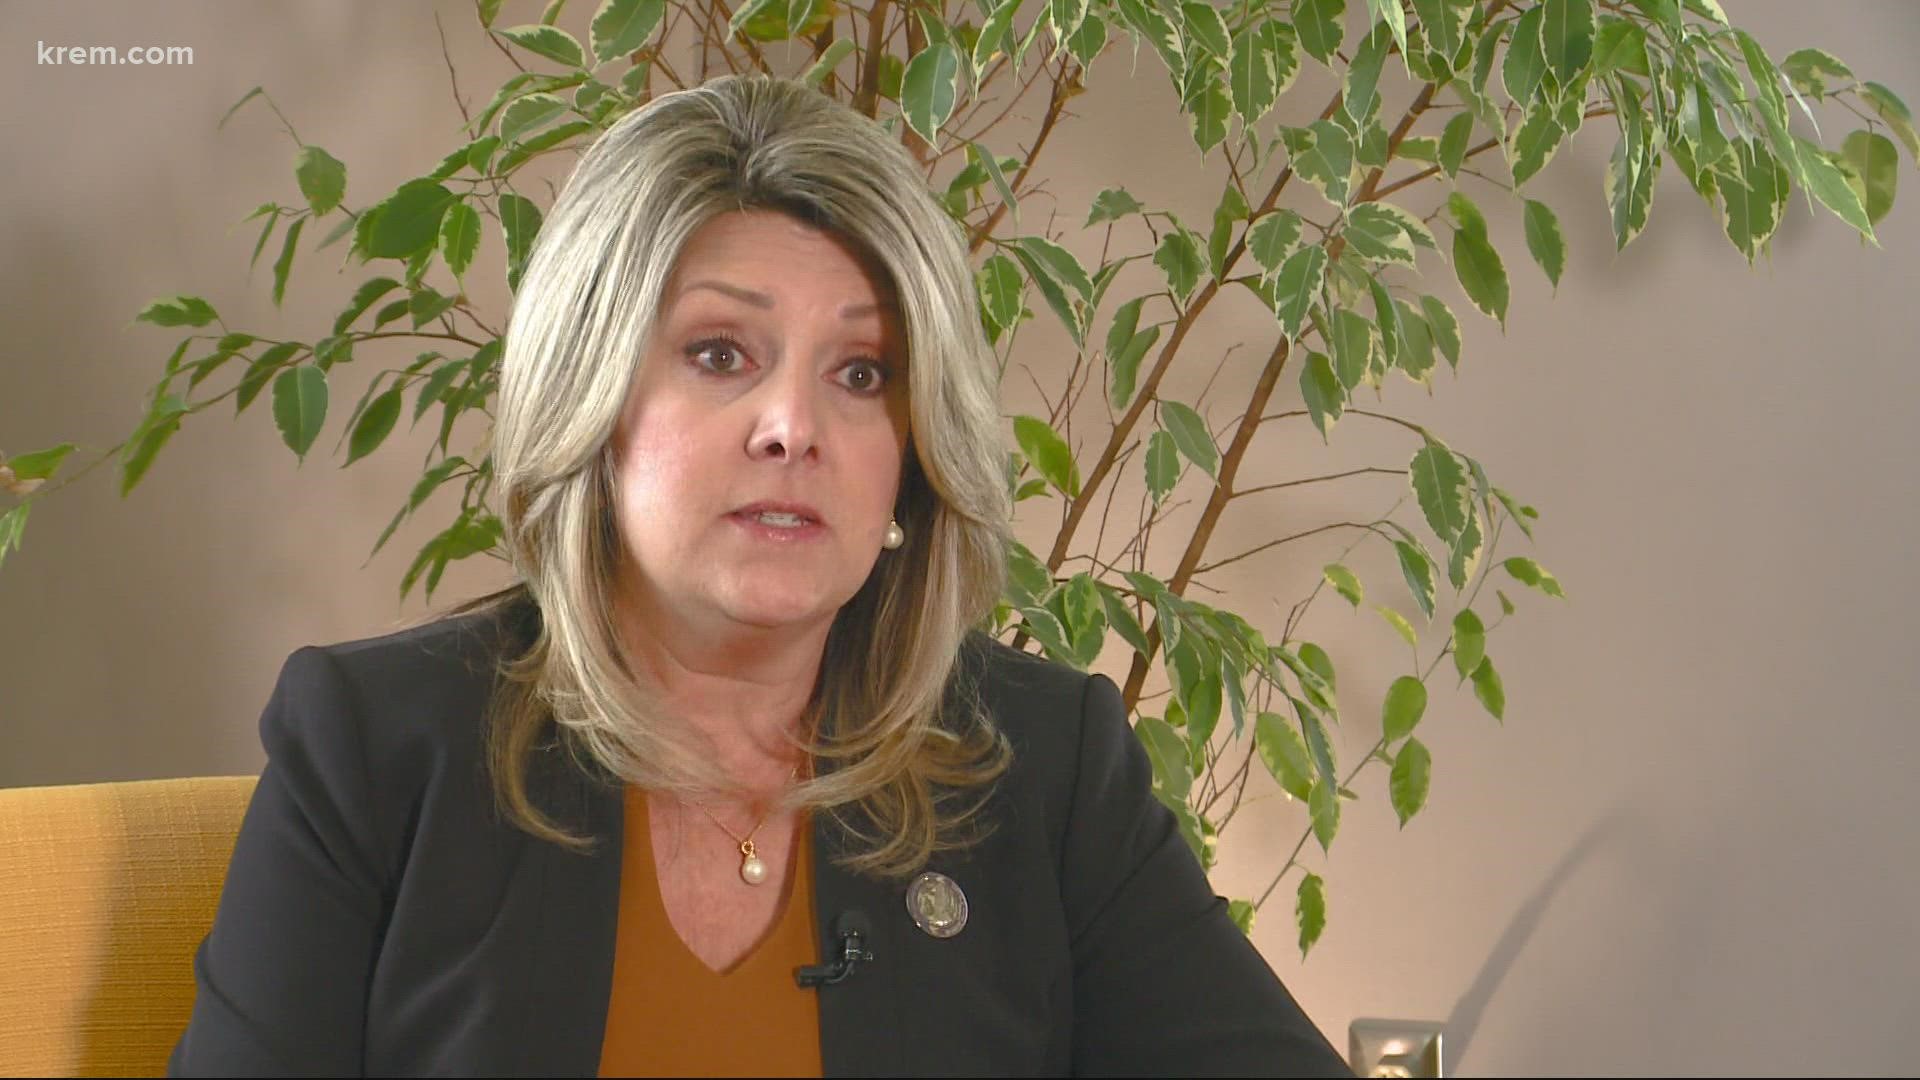 Spokane Mayor Nadine Woodward is taking steps to form a task force in response to the recent shootings in the city.